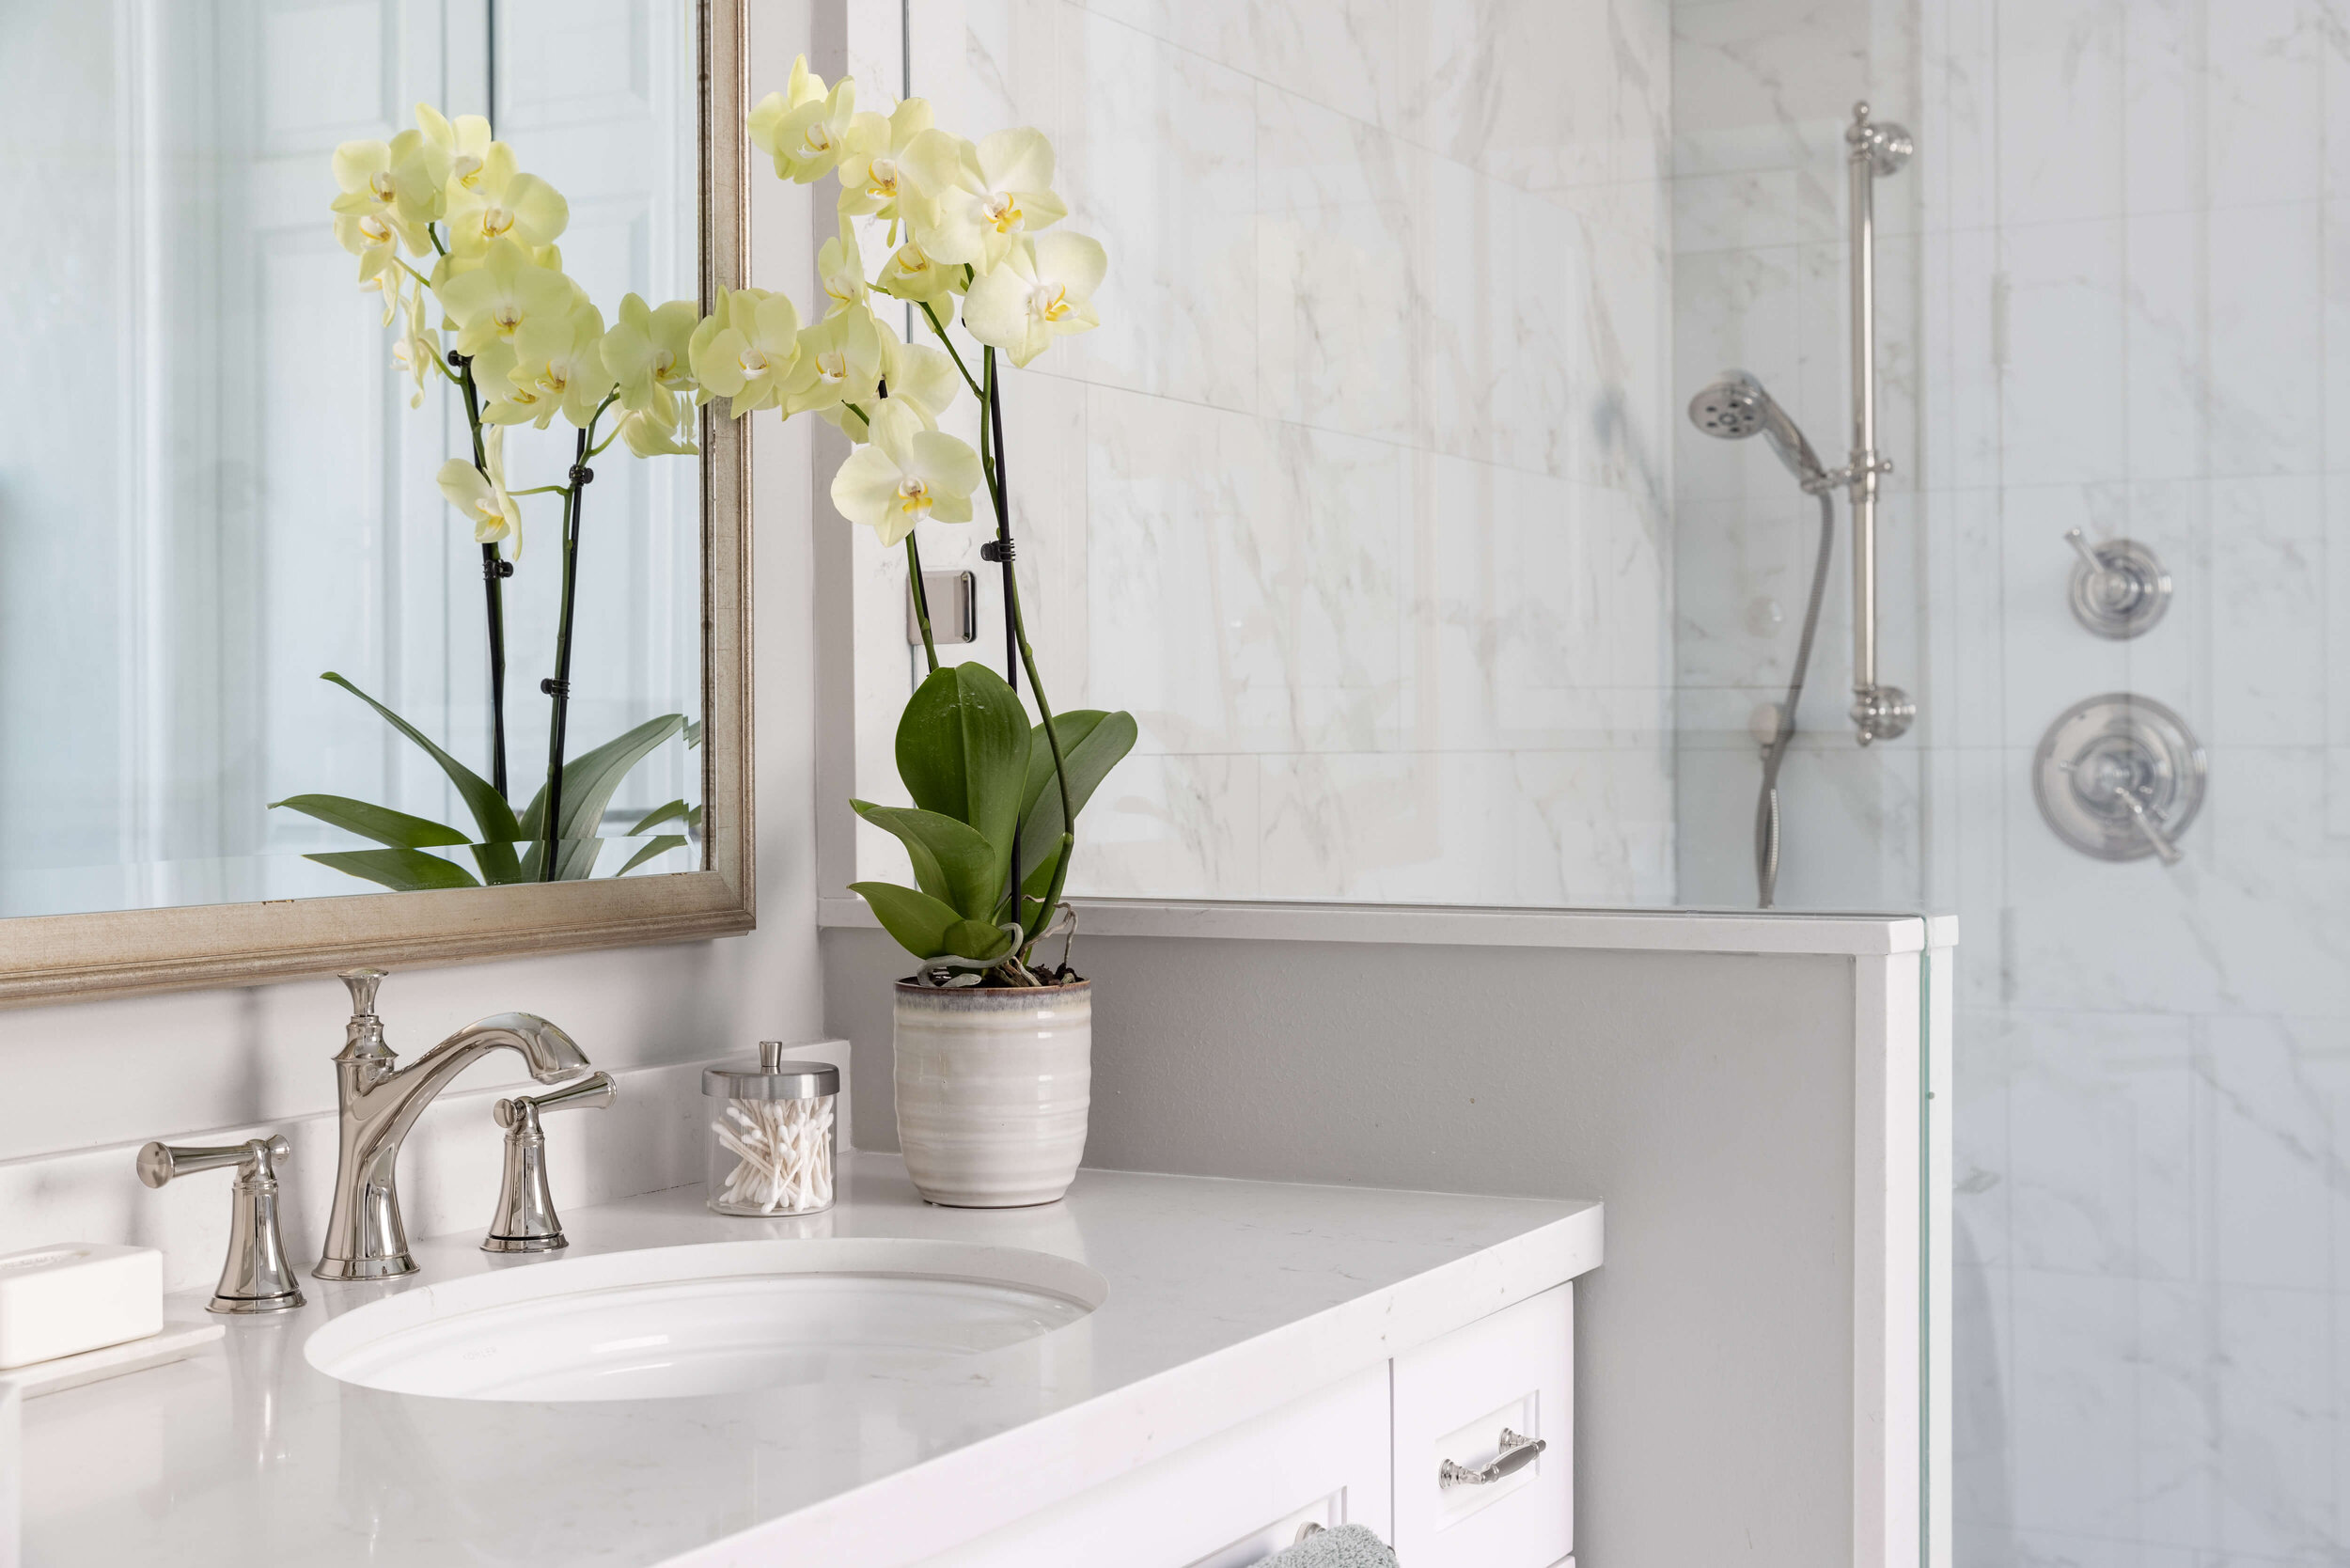 BEFORE AND AFTER - See This Bathroom's Beautifully Serene Remodel ...